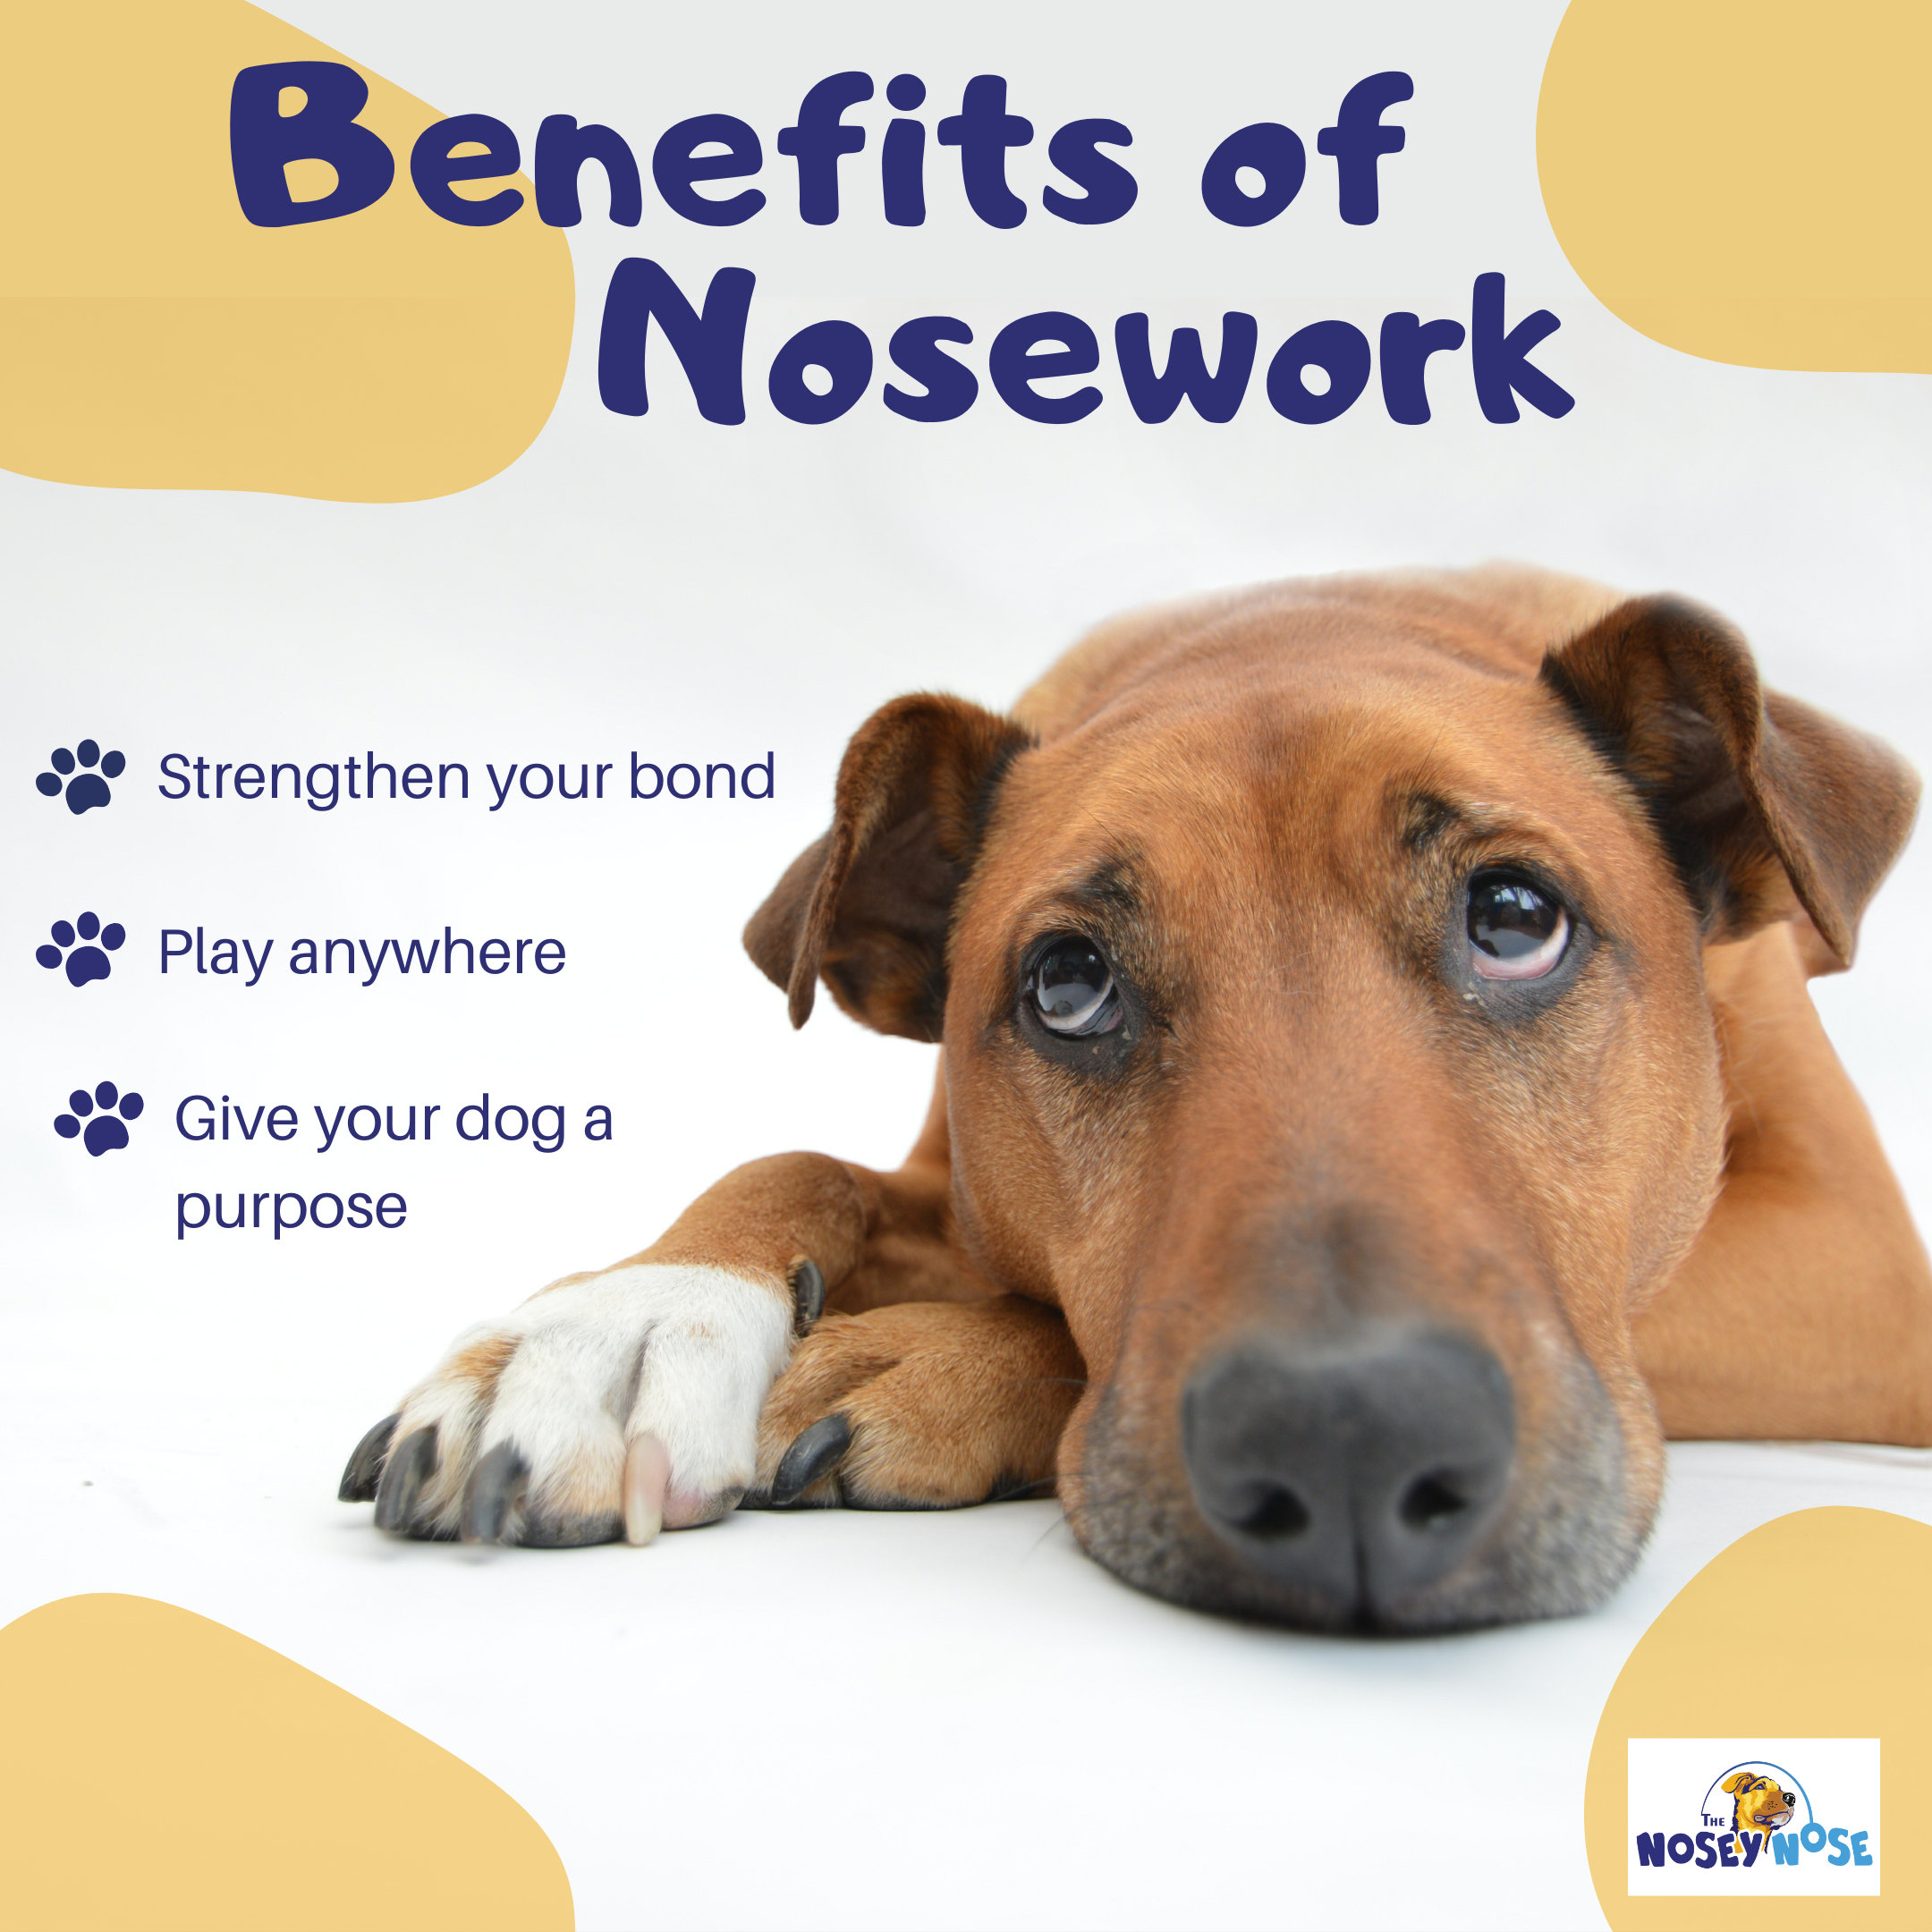 The Nosey Nose: Nosework Scentwork Training for Dogs Puzzle Brain Games,  Anise Scent (Zipper Pouch)